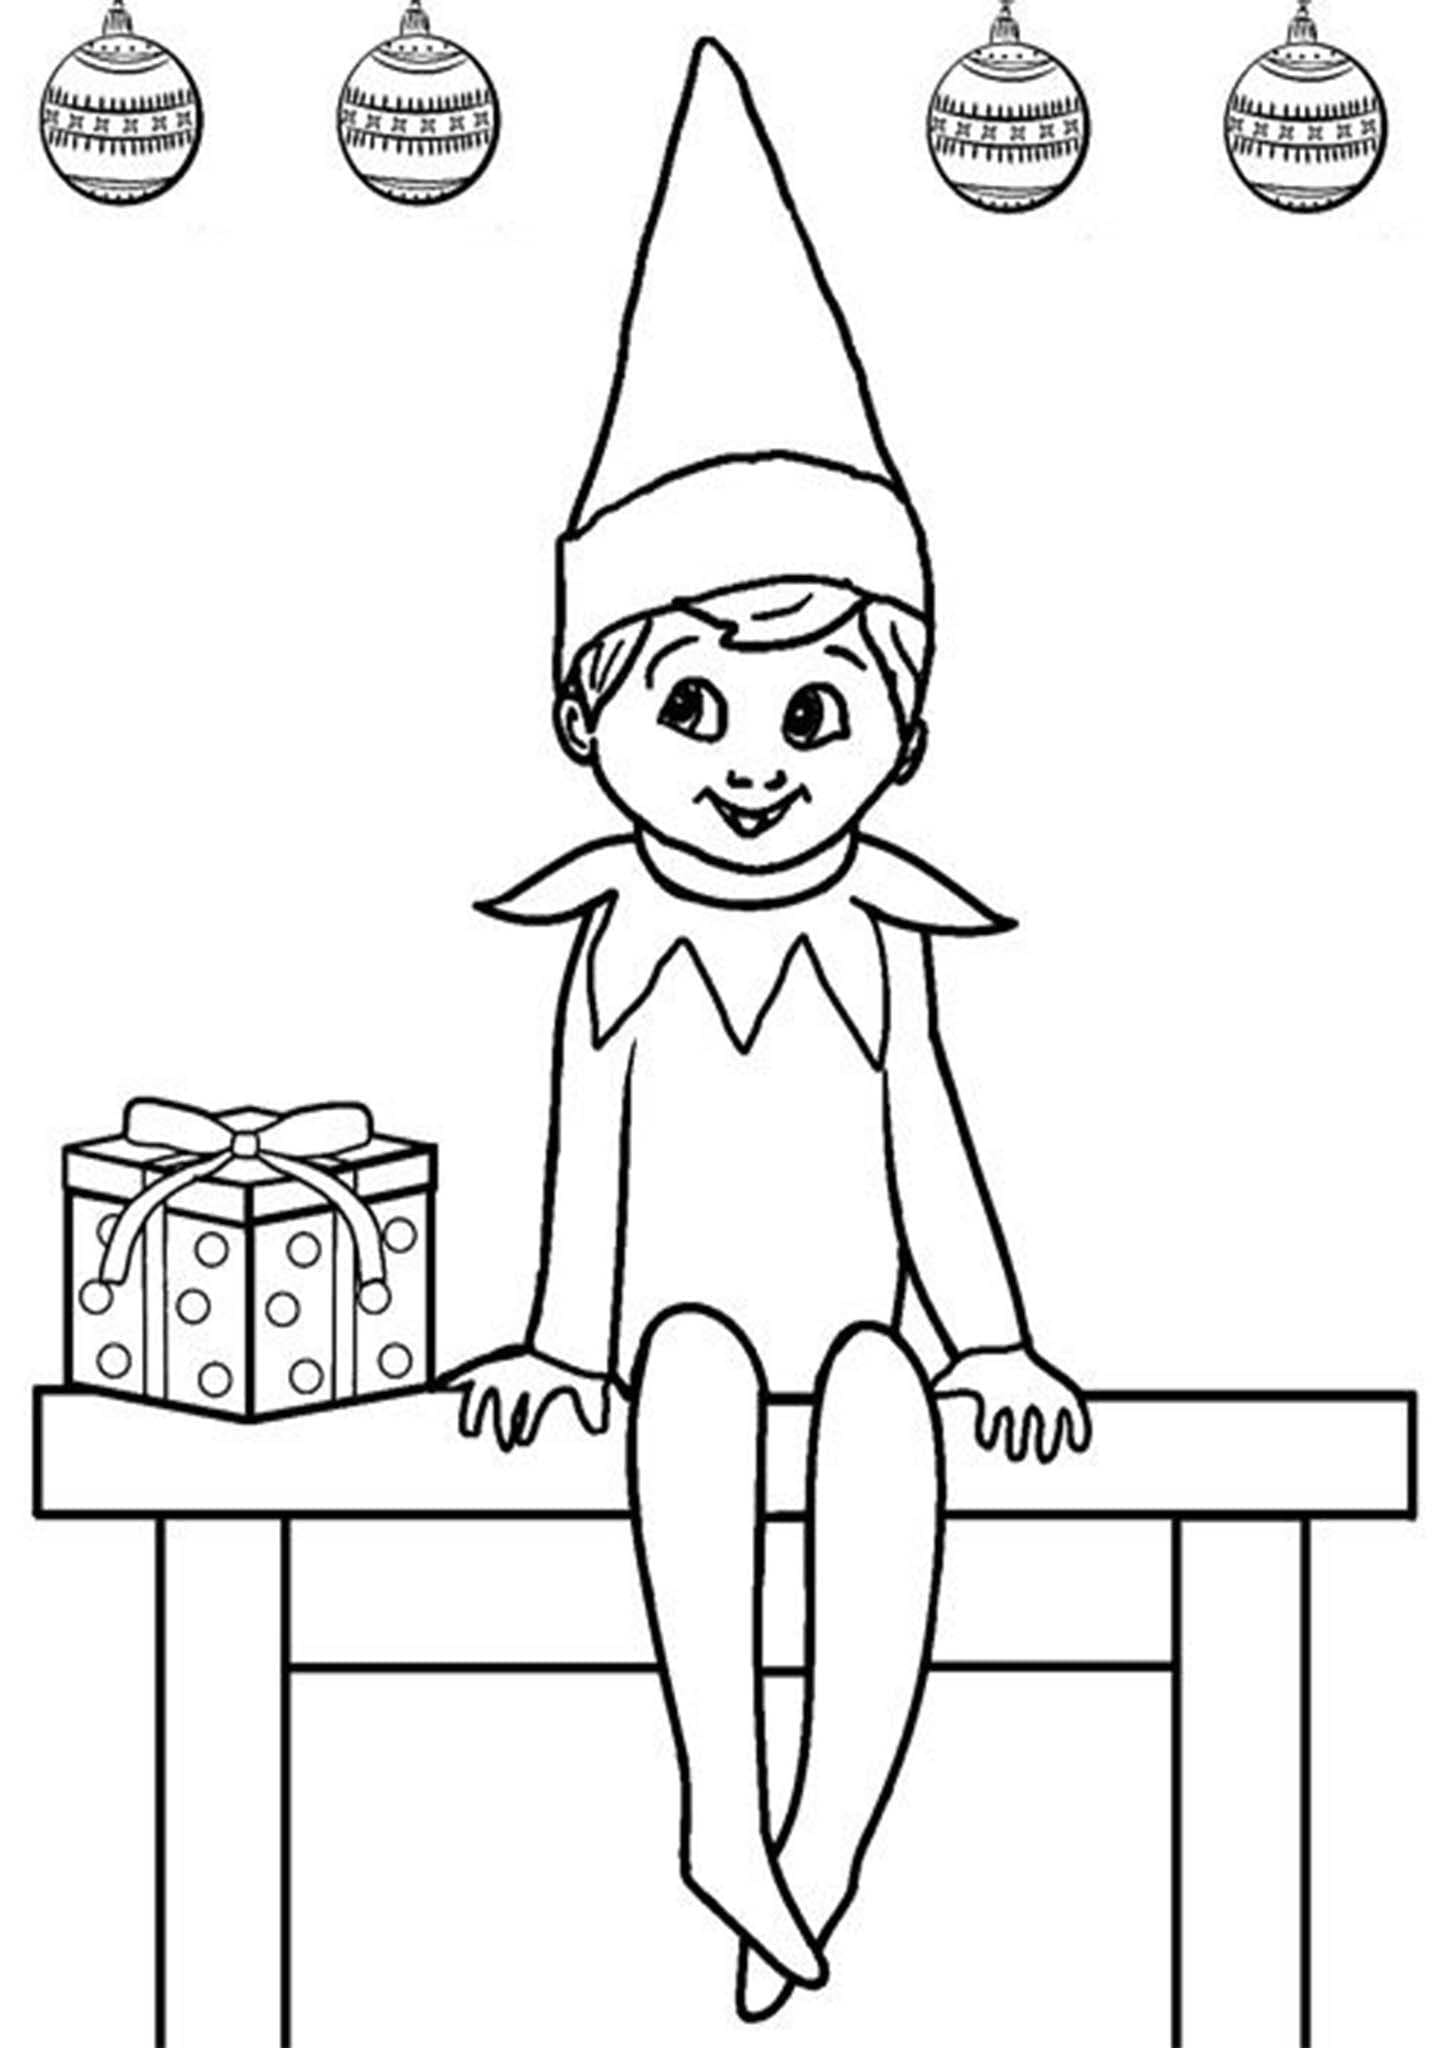 Very Cute Elf on the Shelf coloring page Download Print or Color